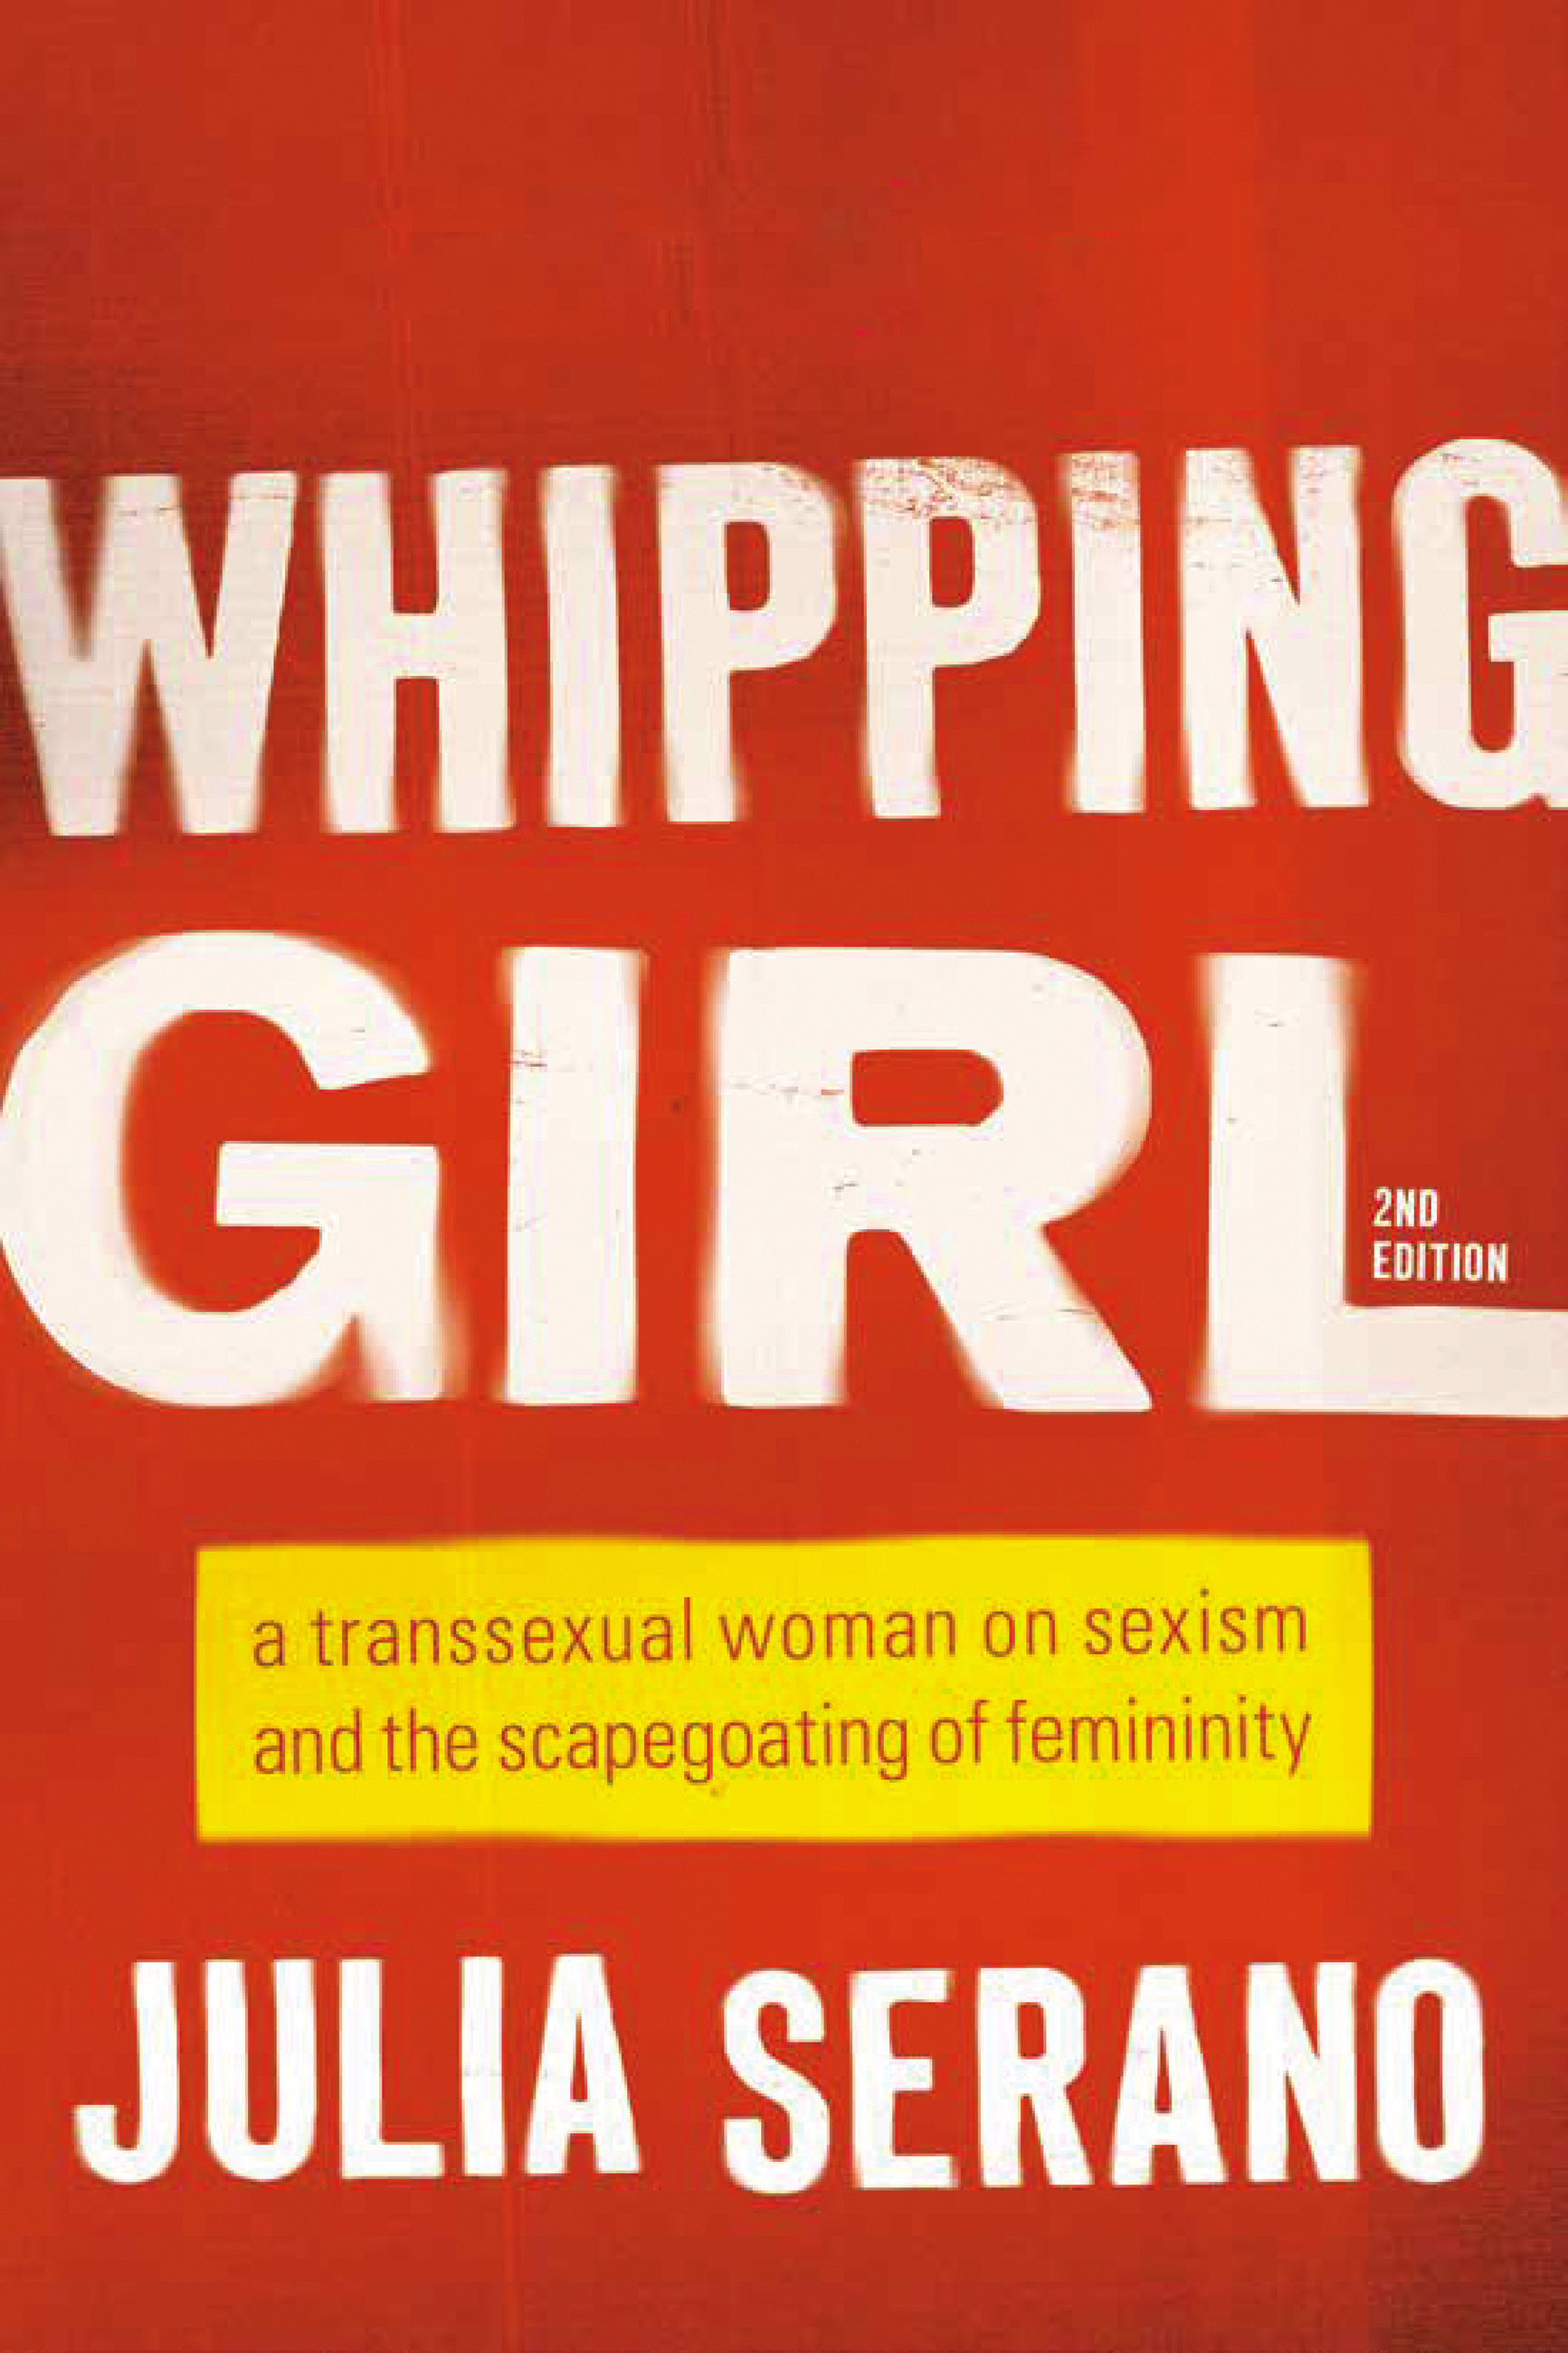 Shemale On Boy Porn - Whipping Girl by Julia Serano | Hachette Book Group